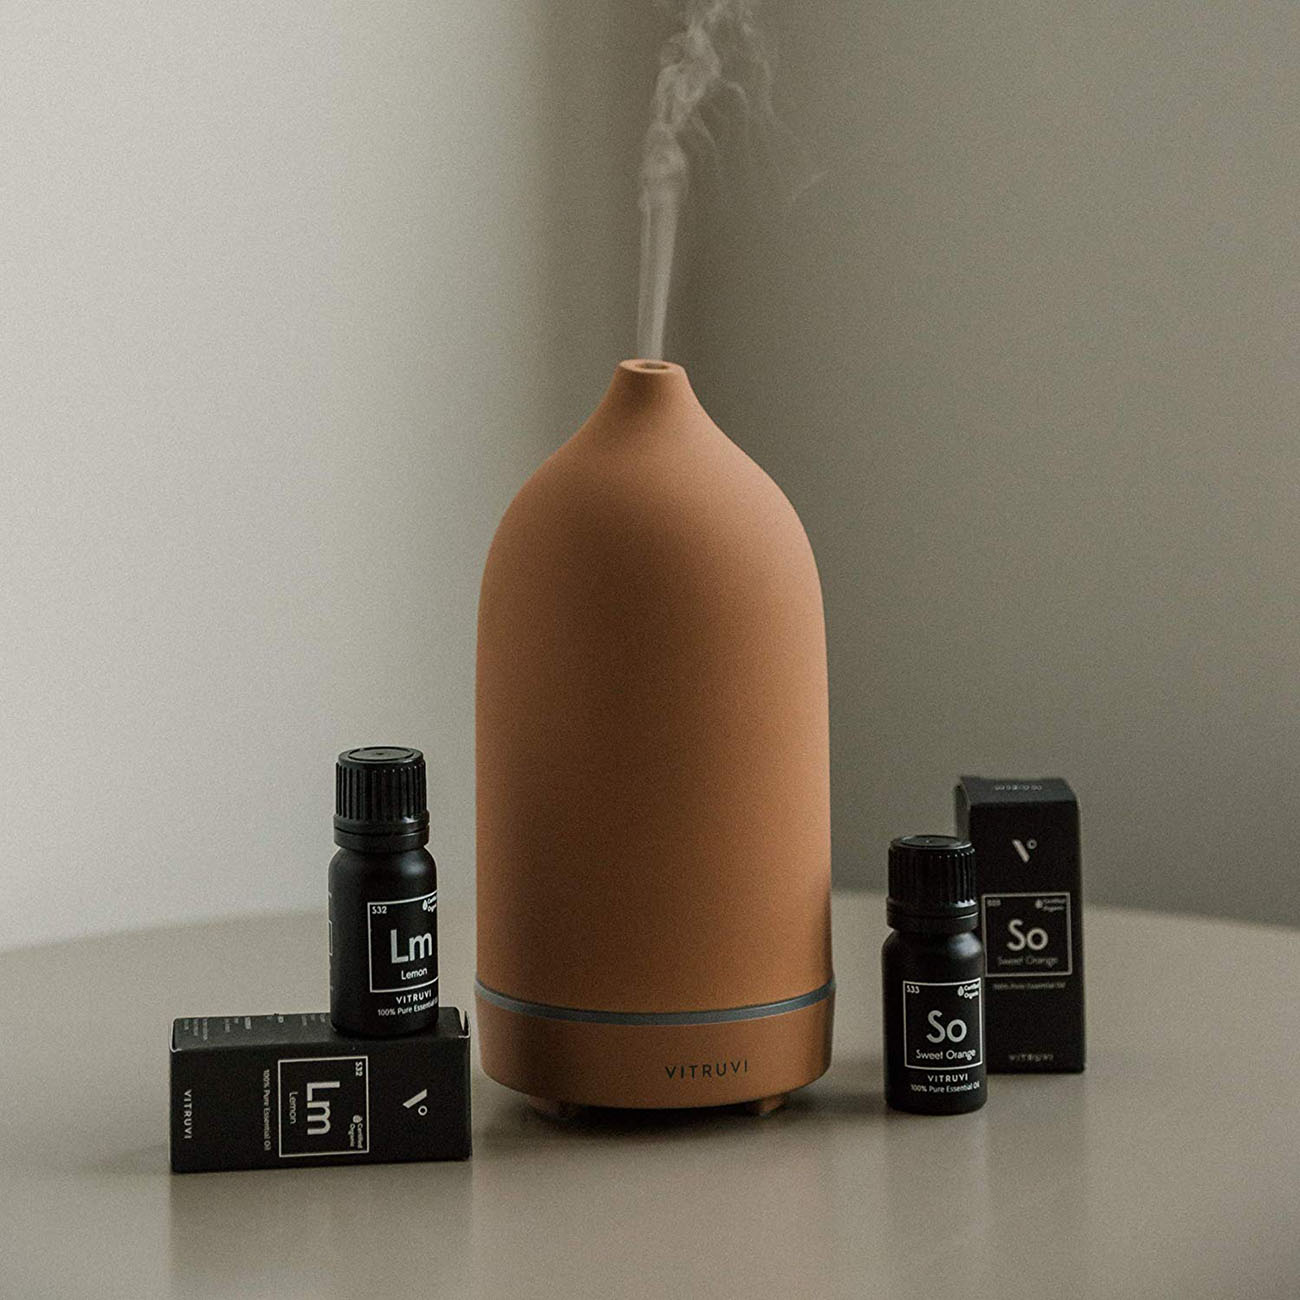 We love this stone terracotta diffuser for essential oils.